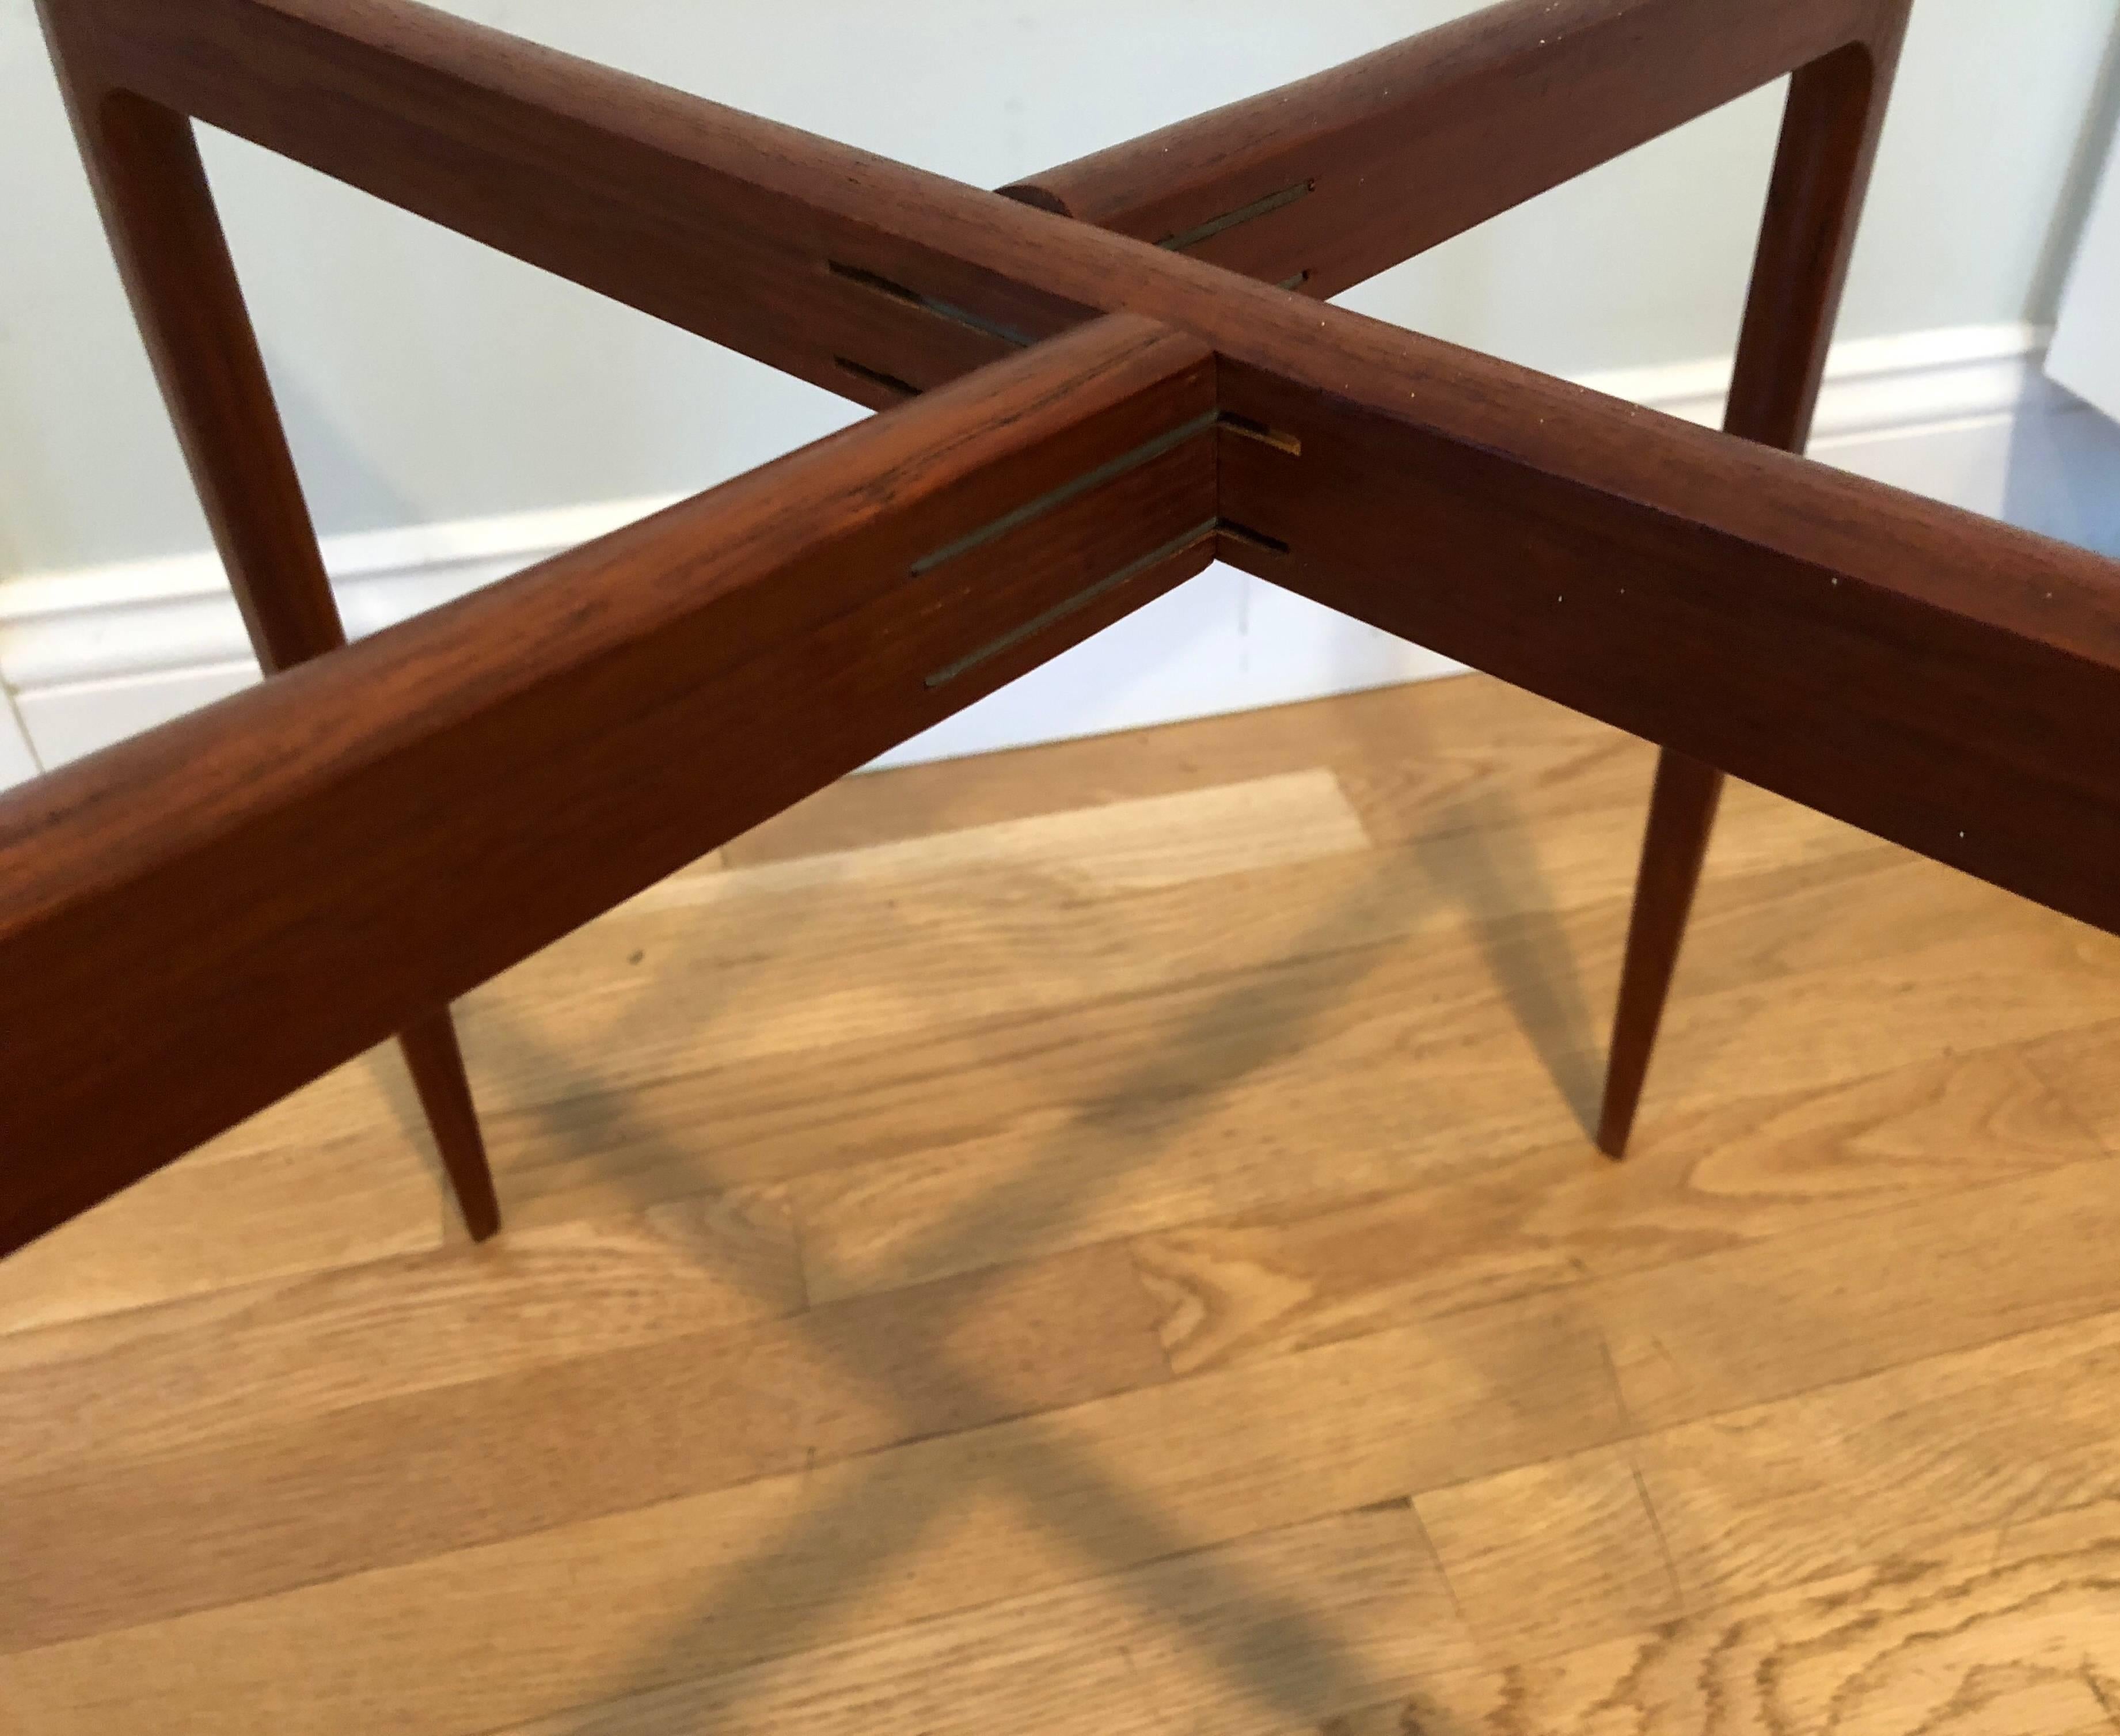 Midcentury folding tray table, Fritz Hansen, Denmark, 1960-1969, teak. In good original condition, some minor staining on the top. Signed FH made in Denmark.